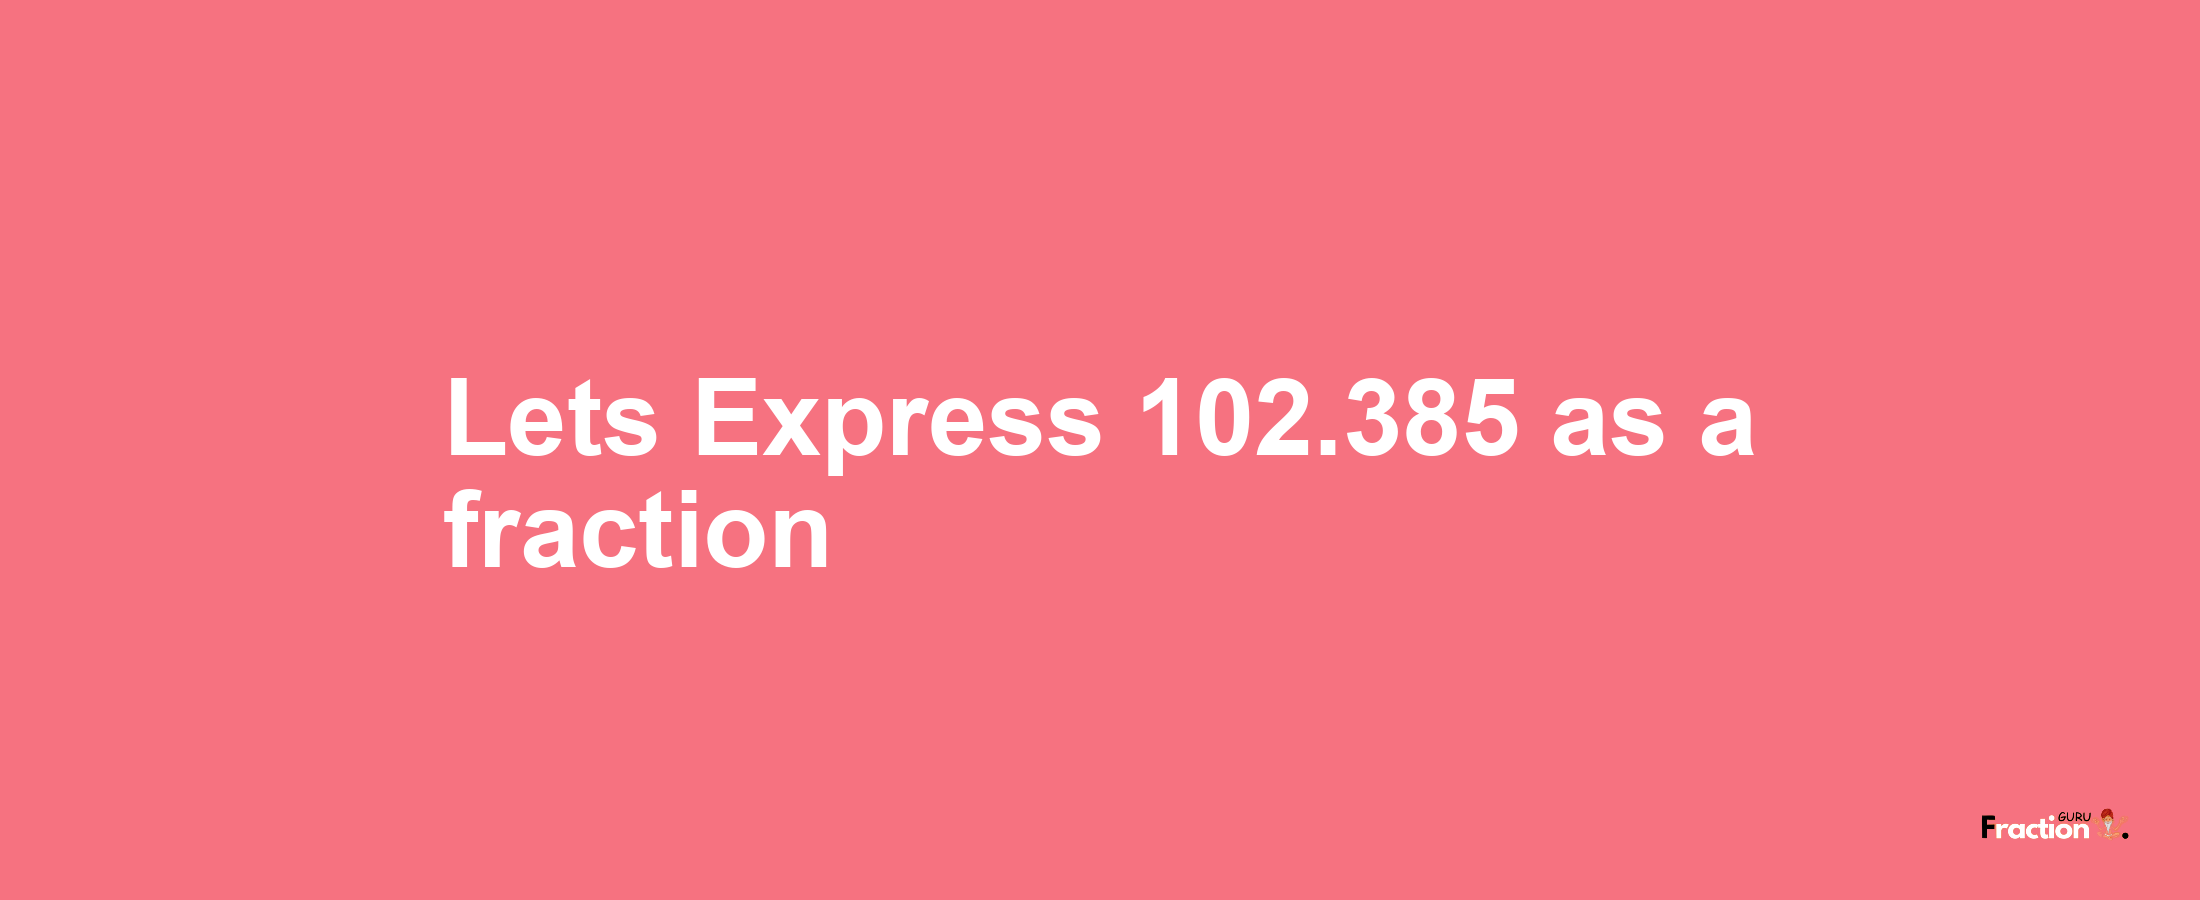 Lets Express 102.385 as afraction